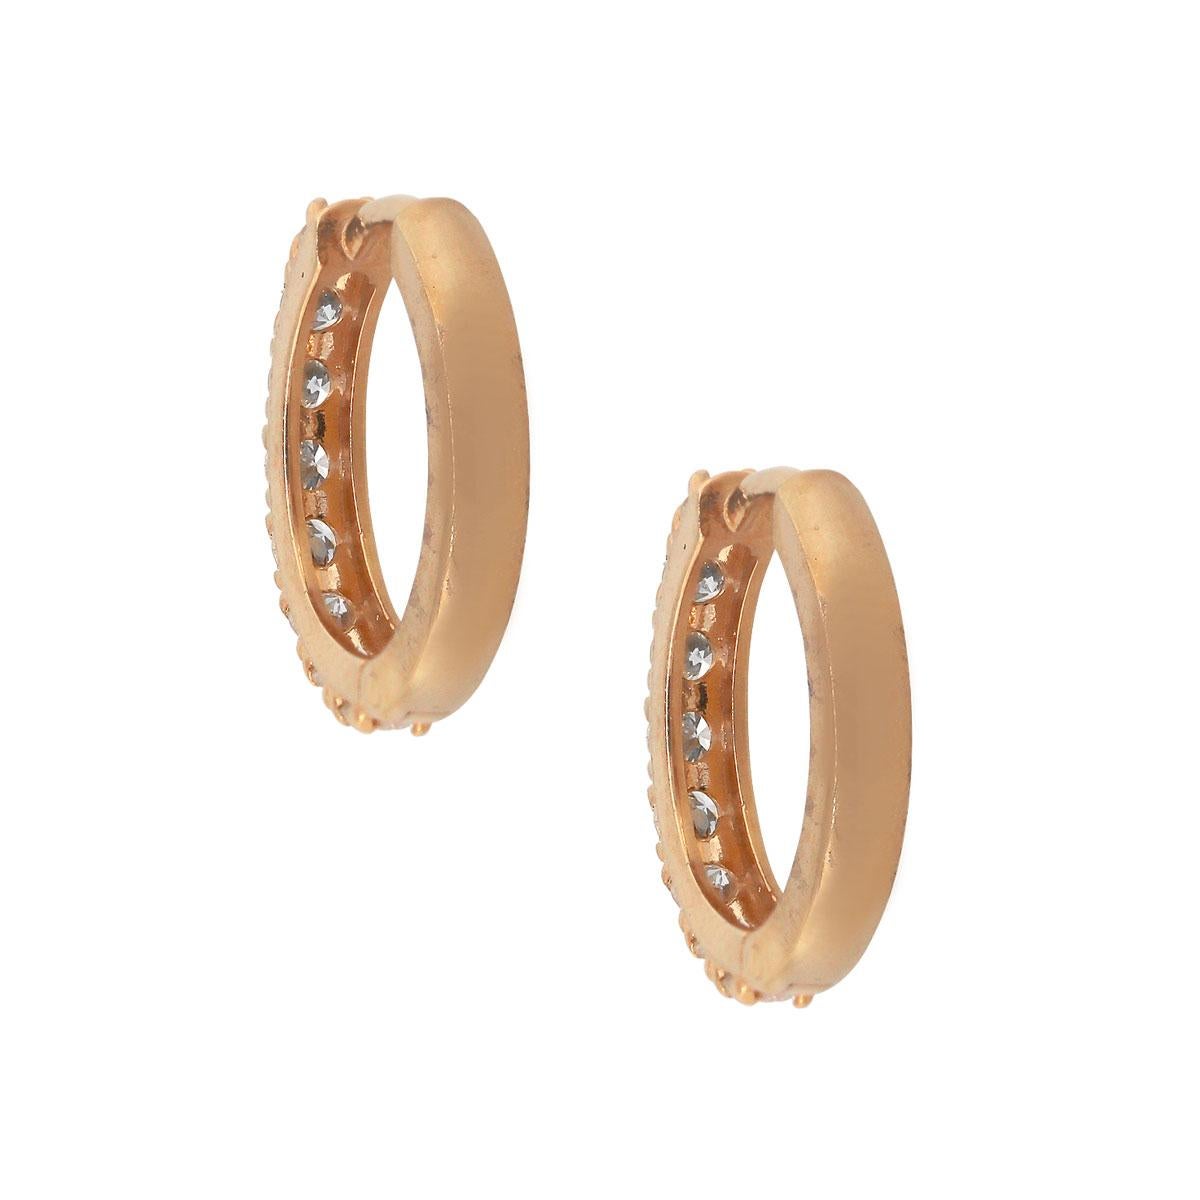 Material: 18k rose gold
Diamond Details: Approx. 0.66ctw of round cut diamonds. Diamonds are G/H in color and VS in clarity
Earring Measurements: 0.58